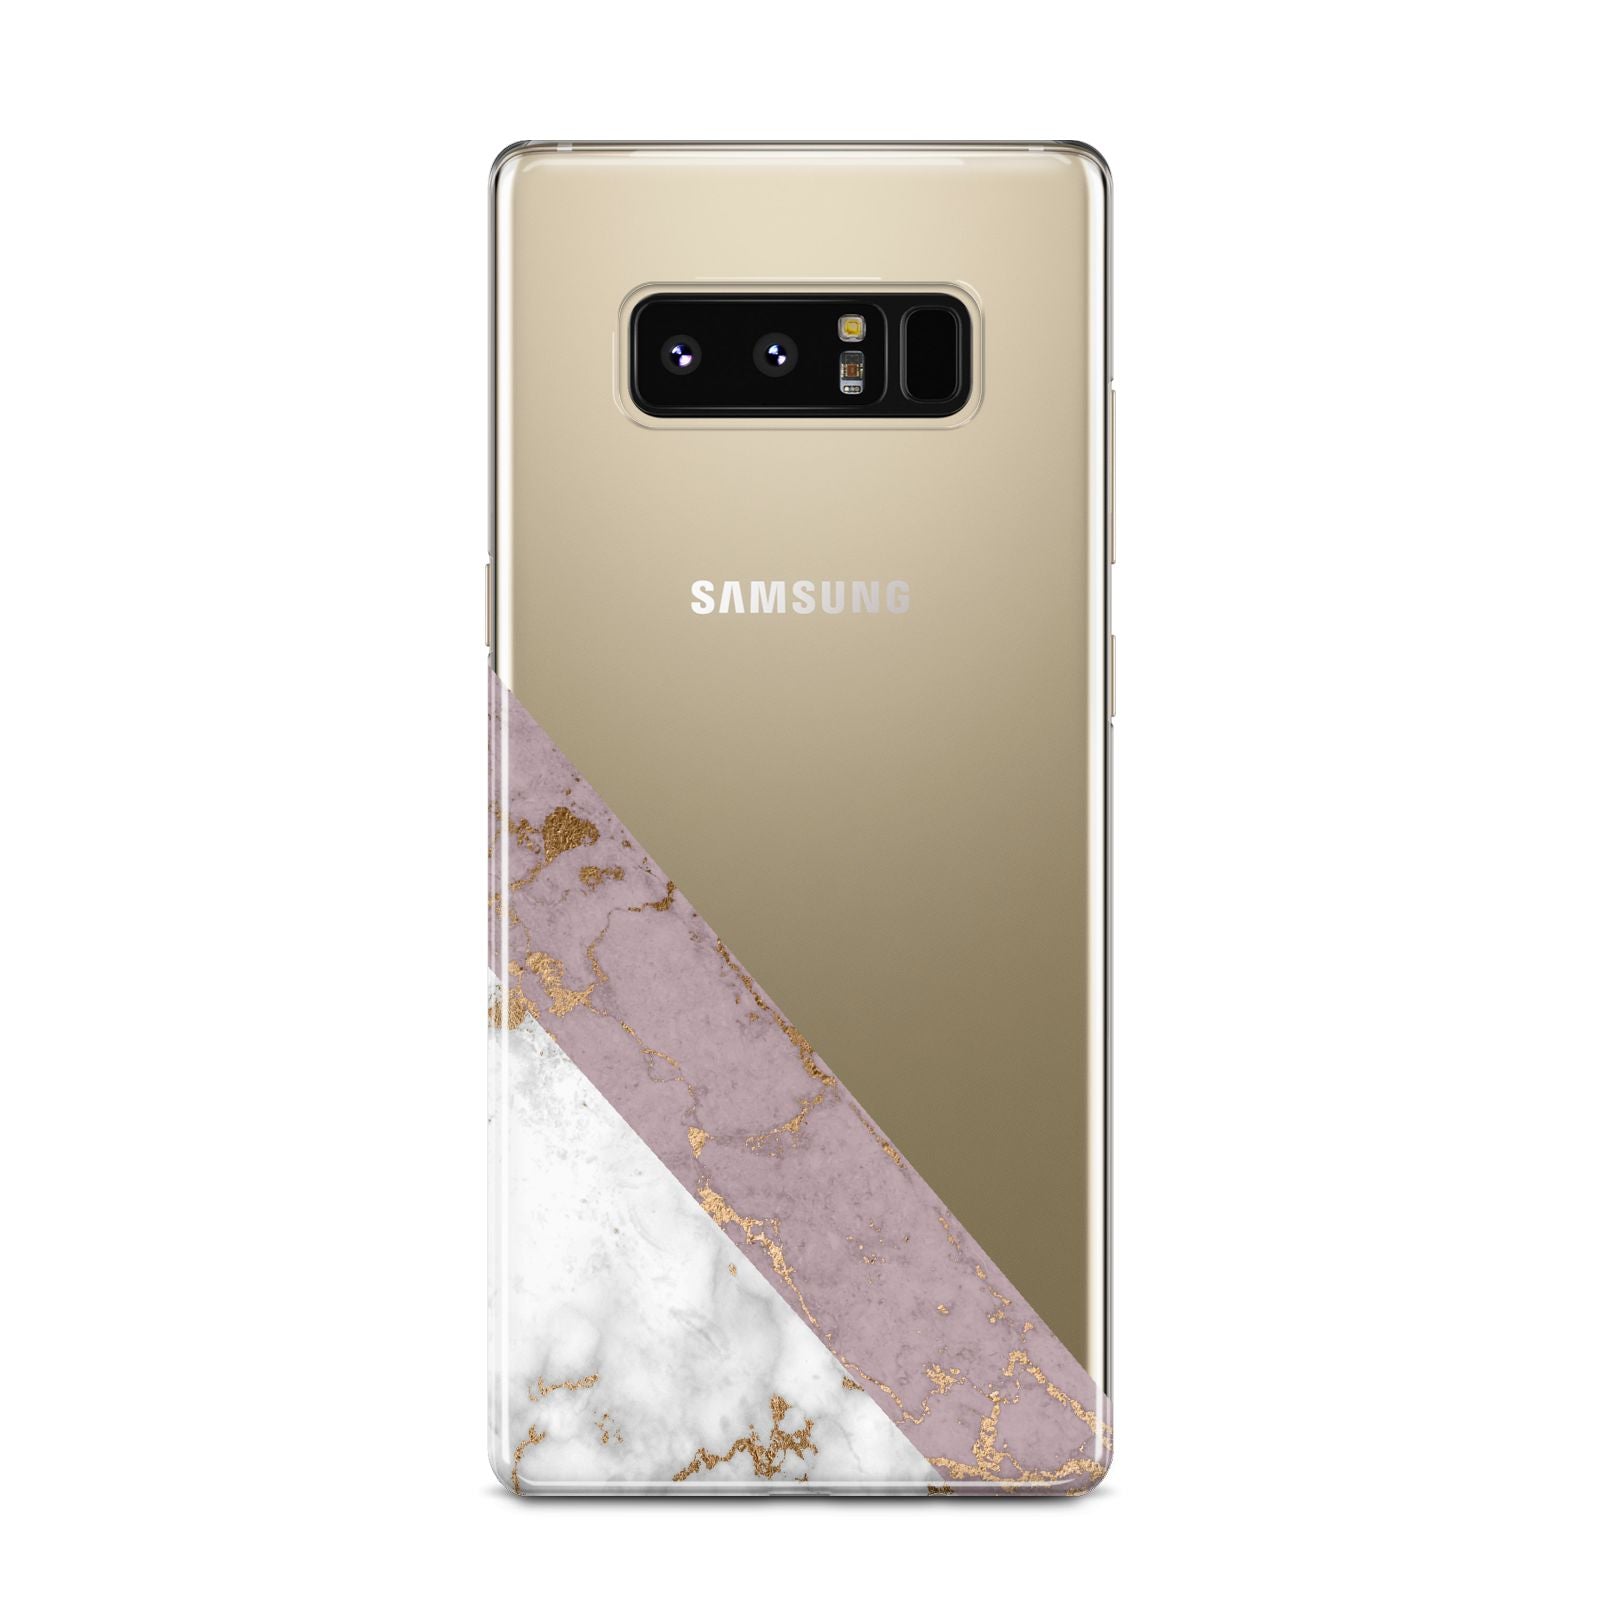 Transparent Pink and White Marble Samsung Galaxy Note 8 Case